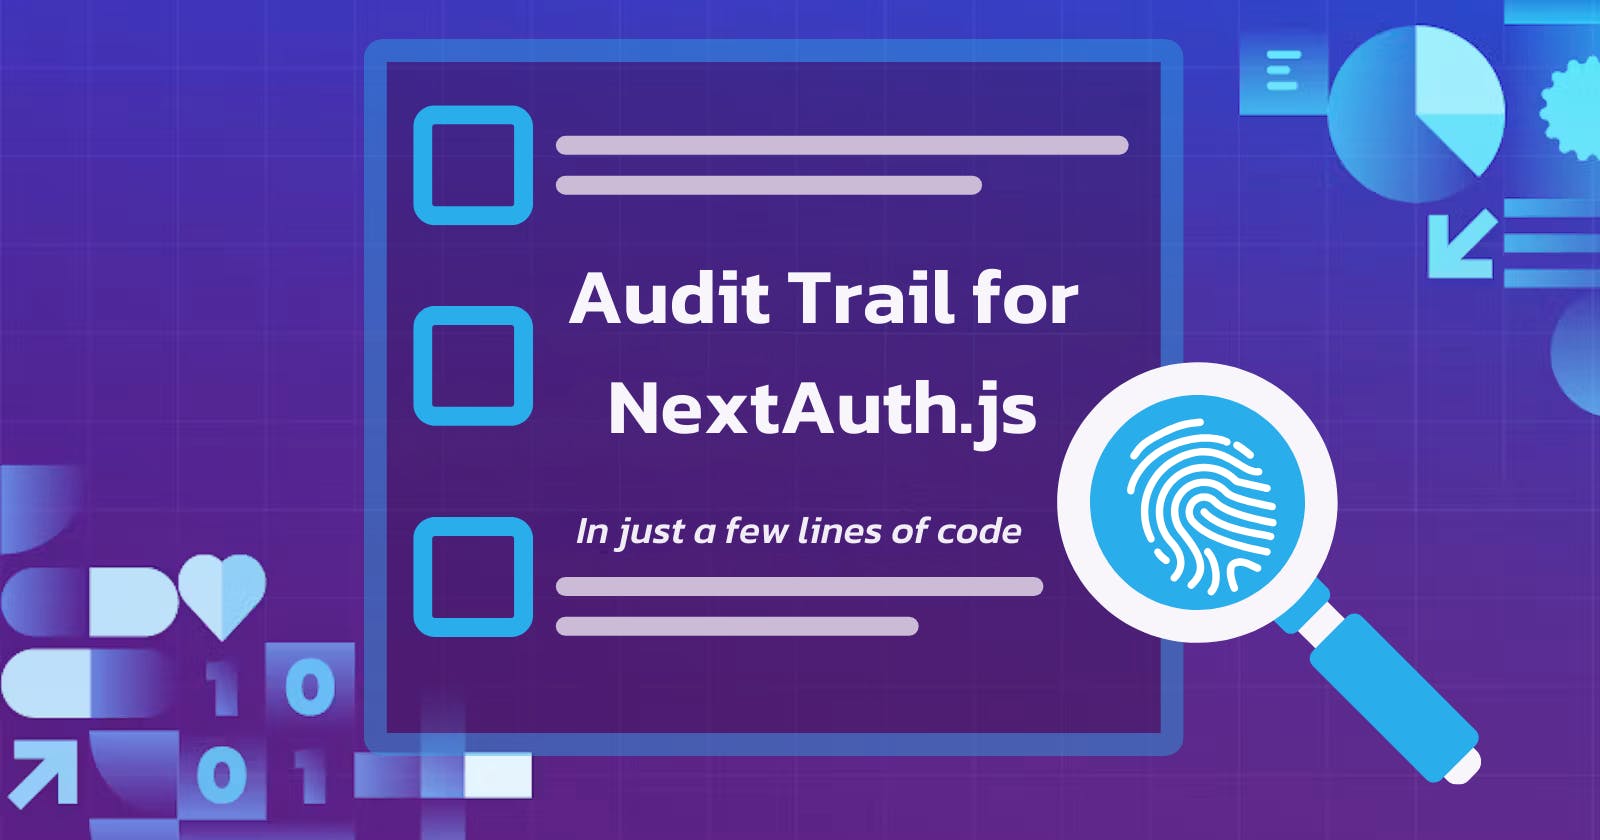 Integrate an Audit Trail for NextAuth.js in a few lines of code